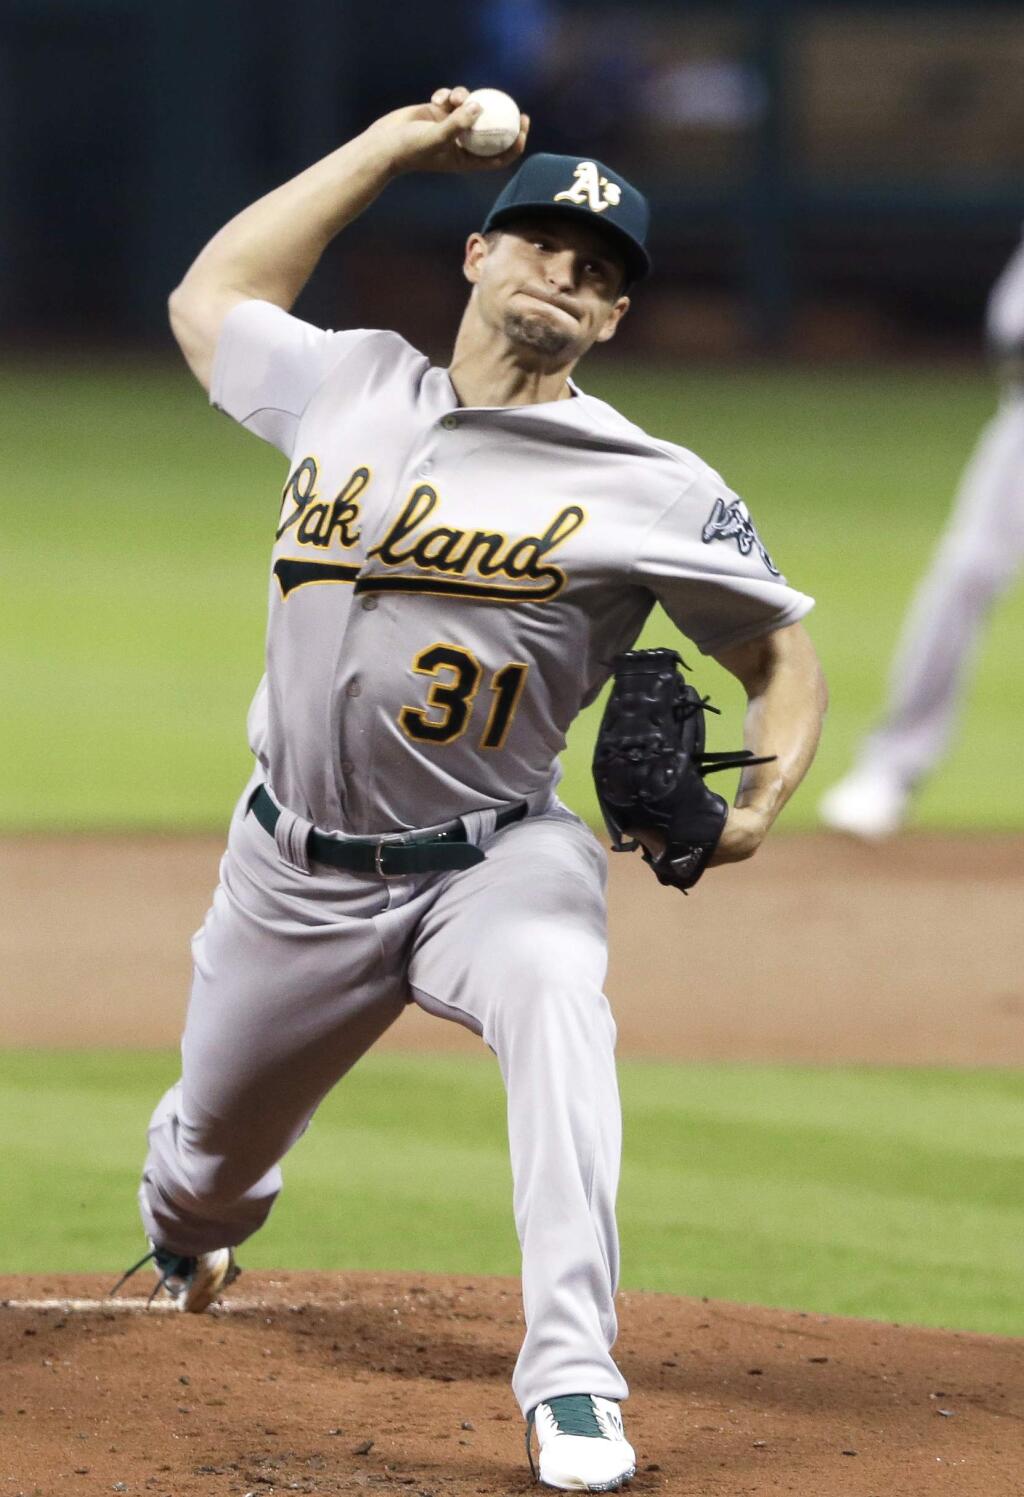 Oakland Athletics' Kendall Graveman delivers a pitch against the Houston Astros in the first inning of a game Tuesday, April 14, 2015, in Houston. (AP Photo/Pat Sullivan)